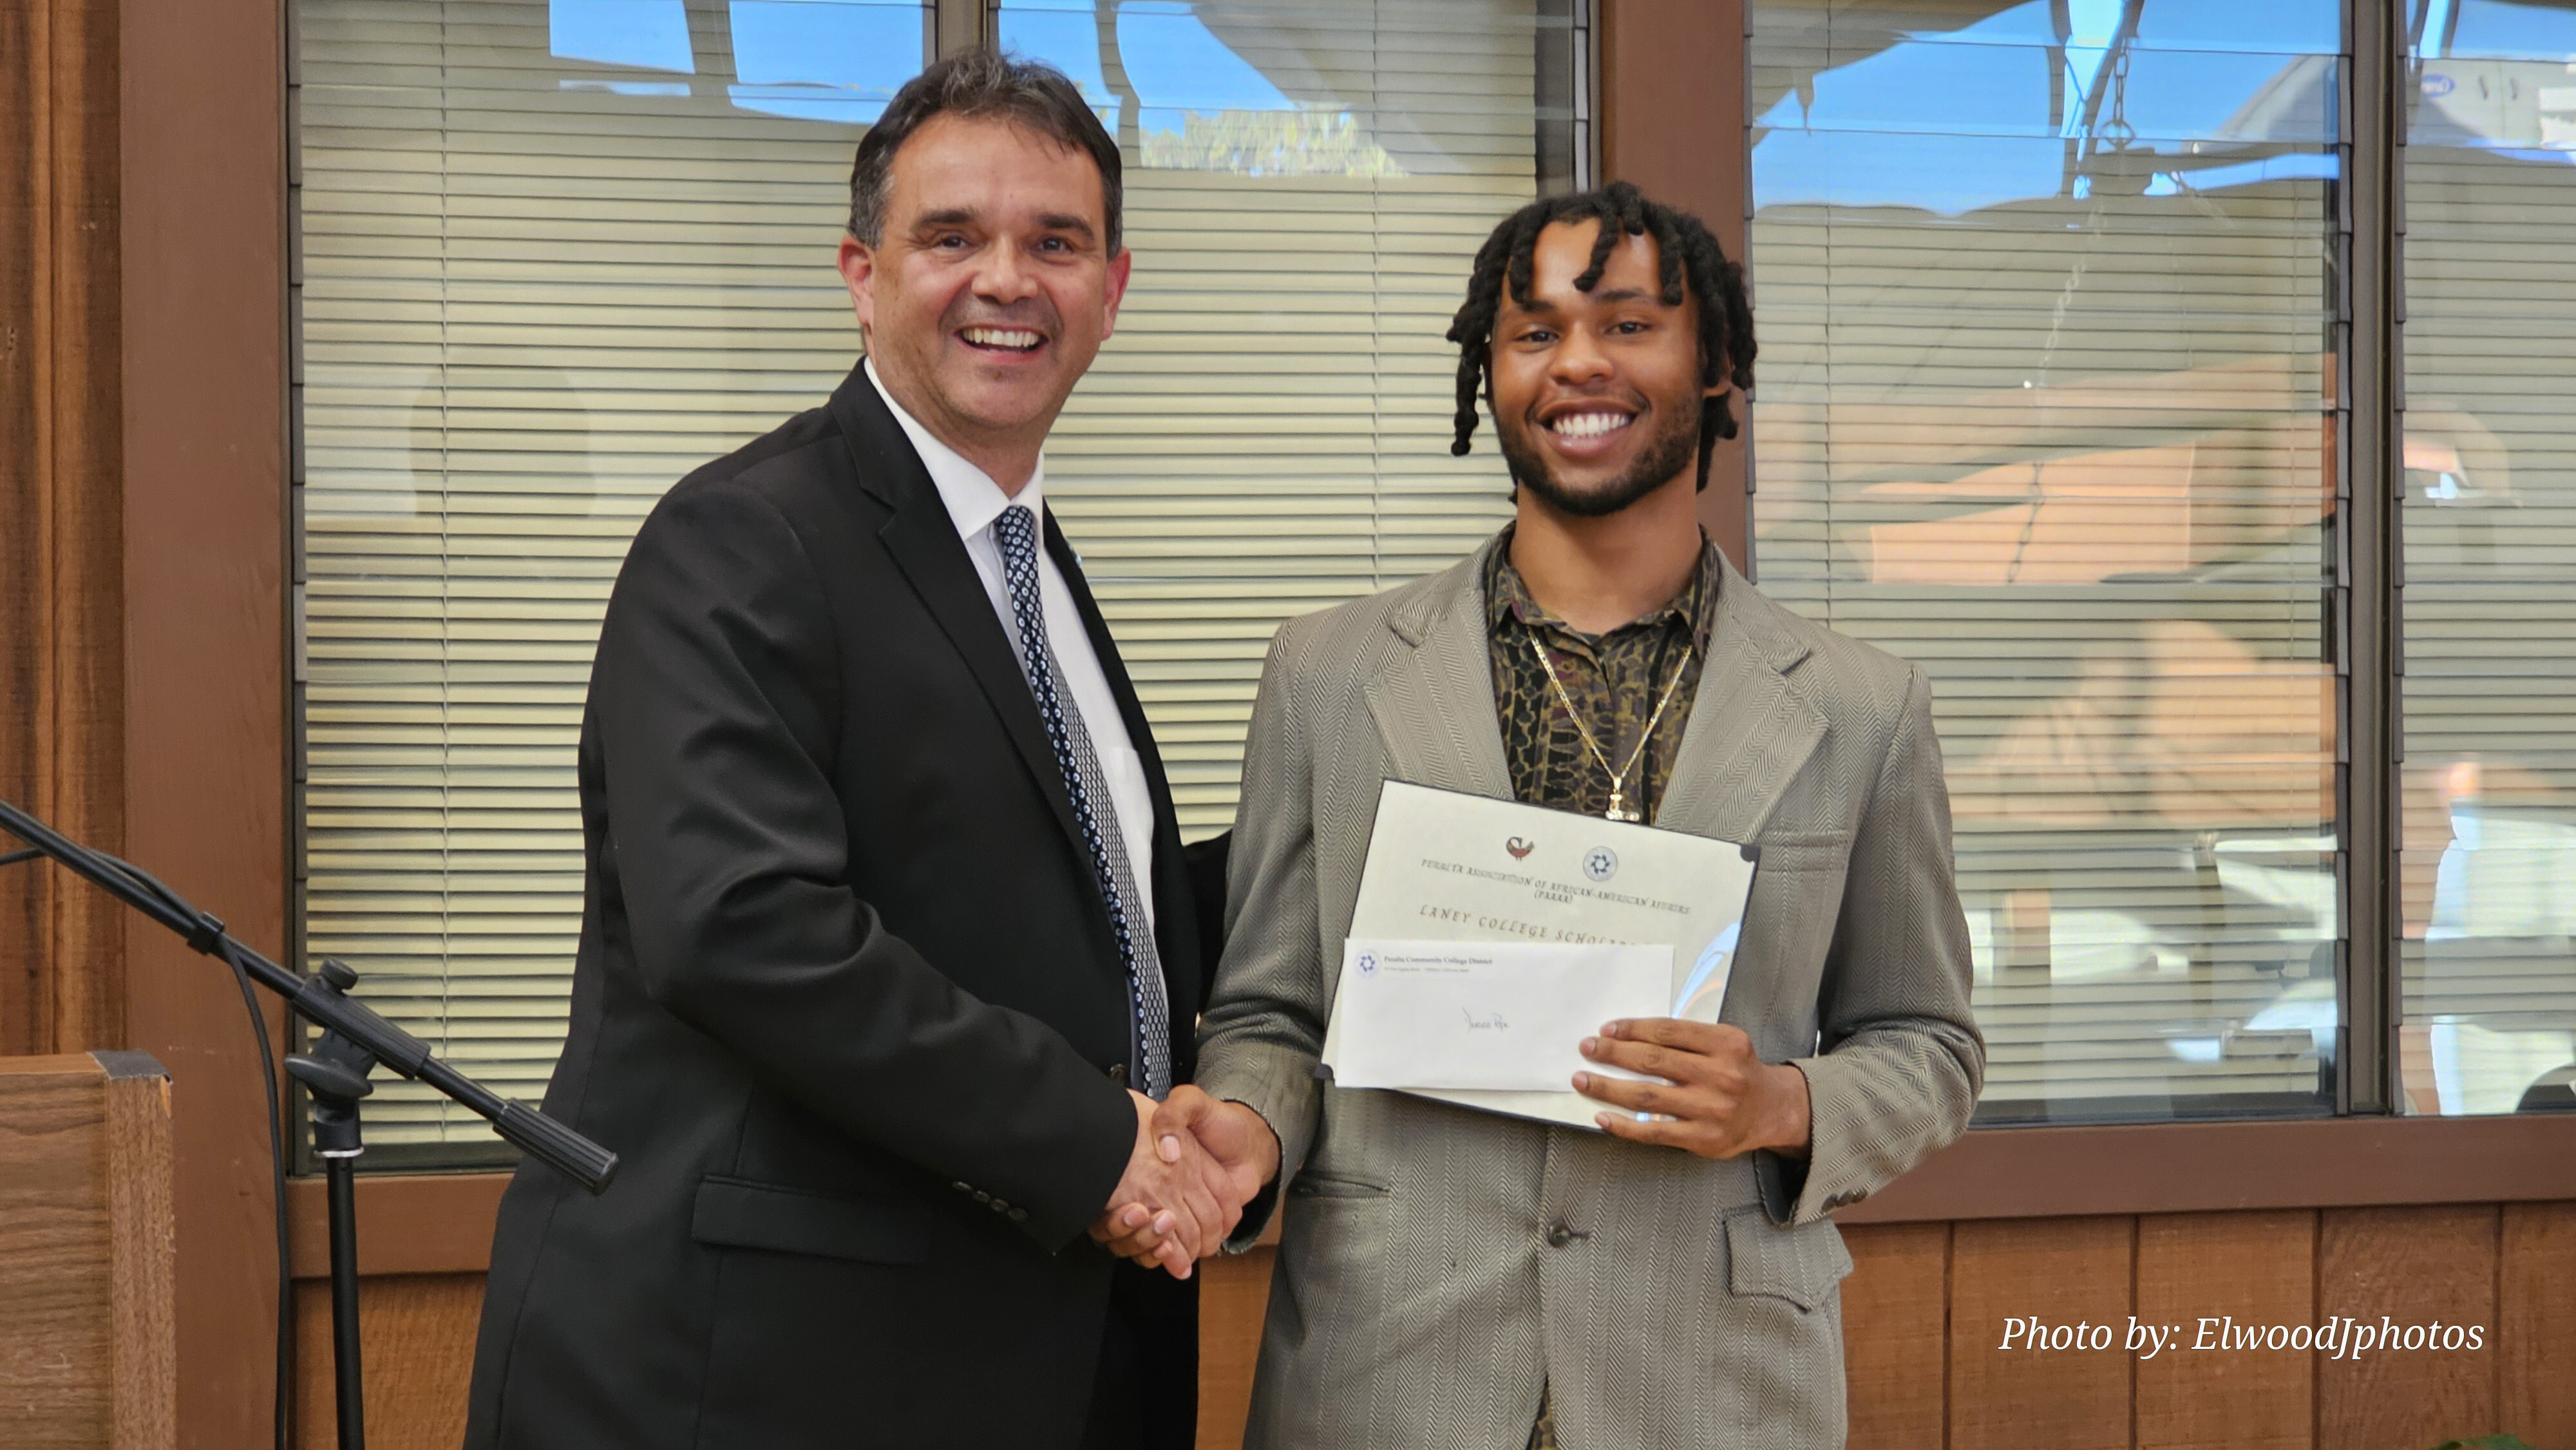 Laney College President Dr. Rudy Besikof presents a PAAAA Scholarship Award to Laney student Damien Pope, Jr.